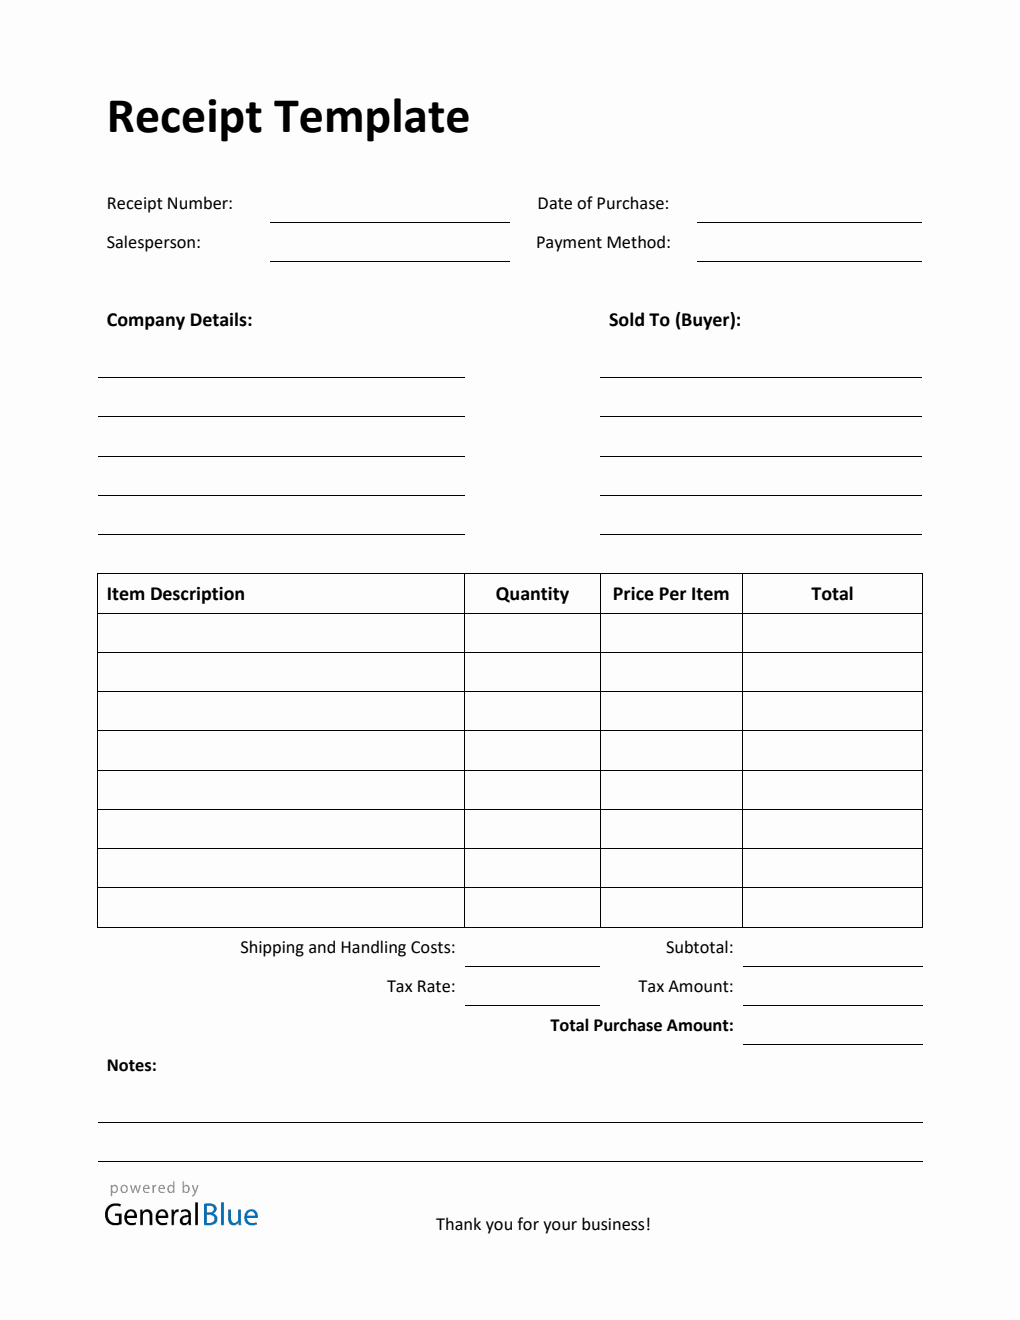 Printable Receipt Template with Notes in PDF